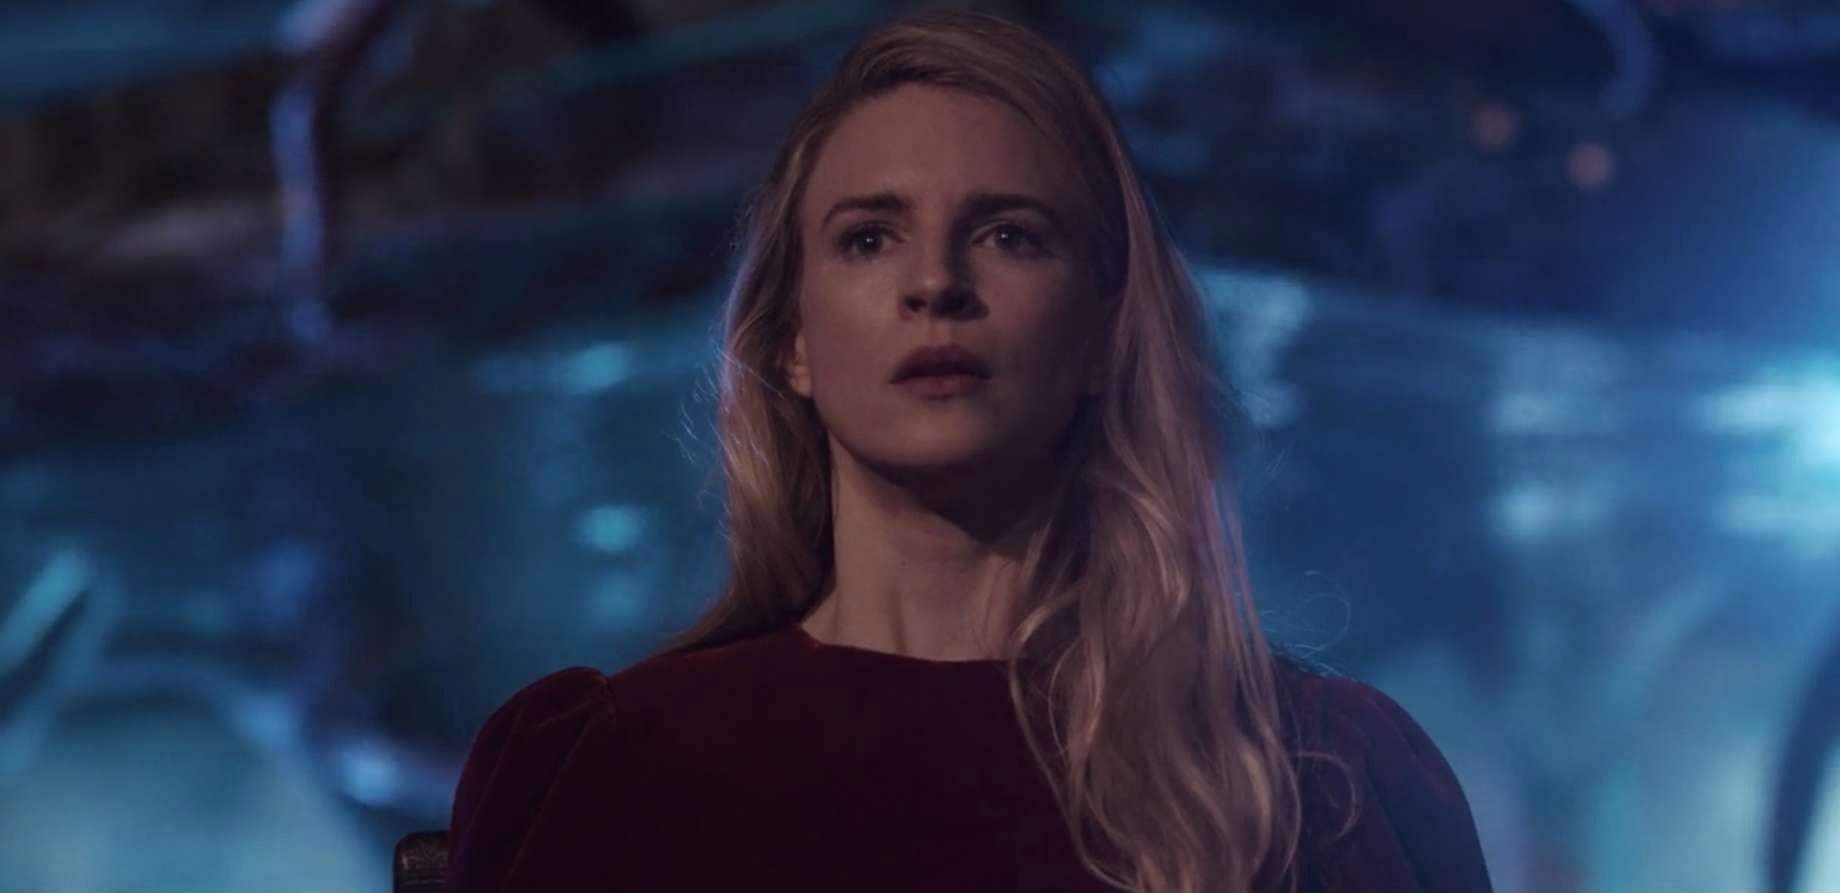 10 Burning Questions We Still Have After The OA Season 2 Finale